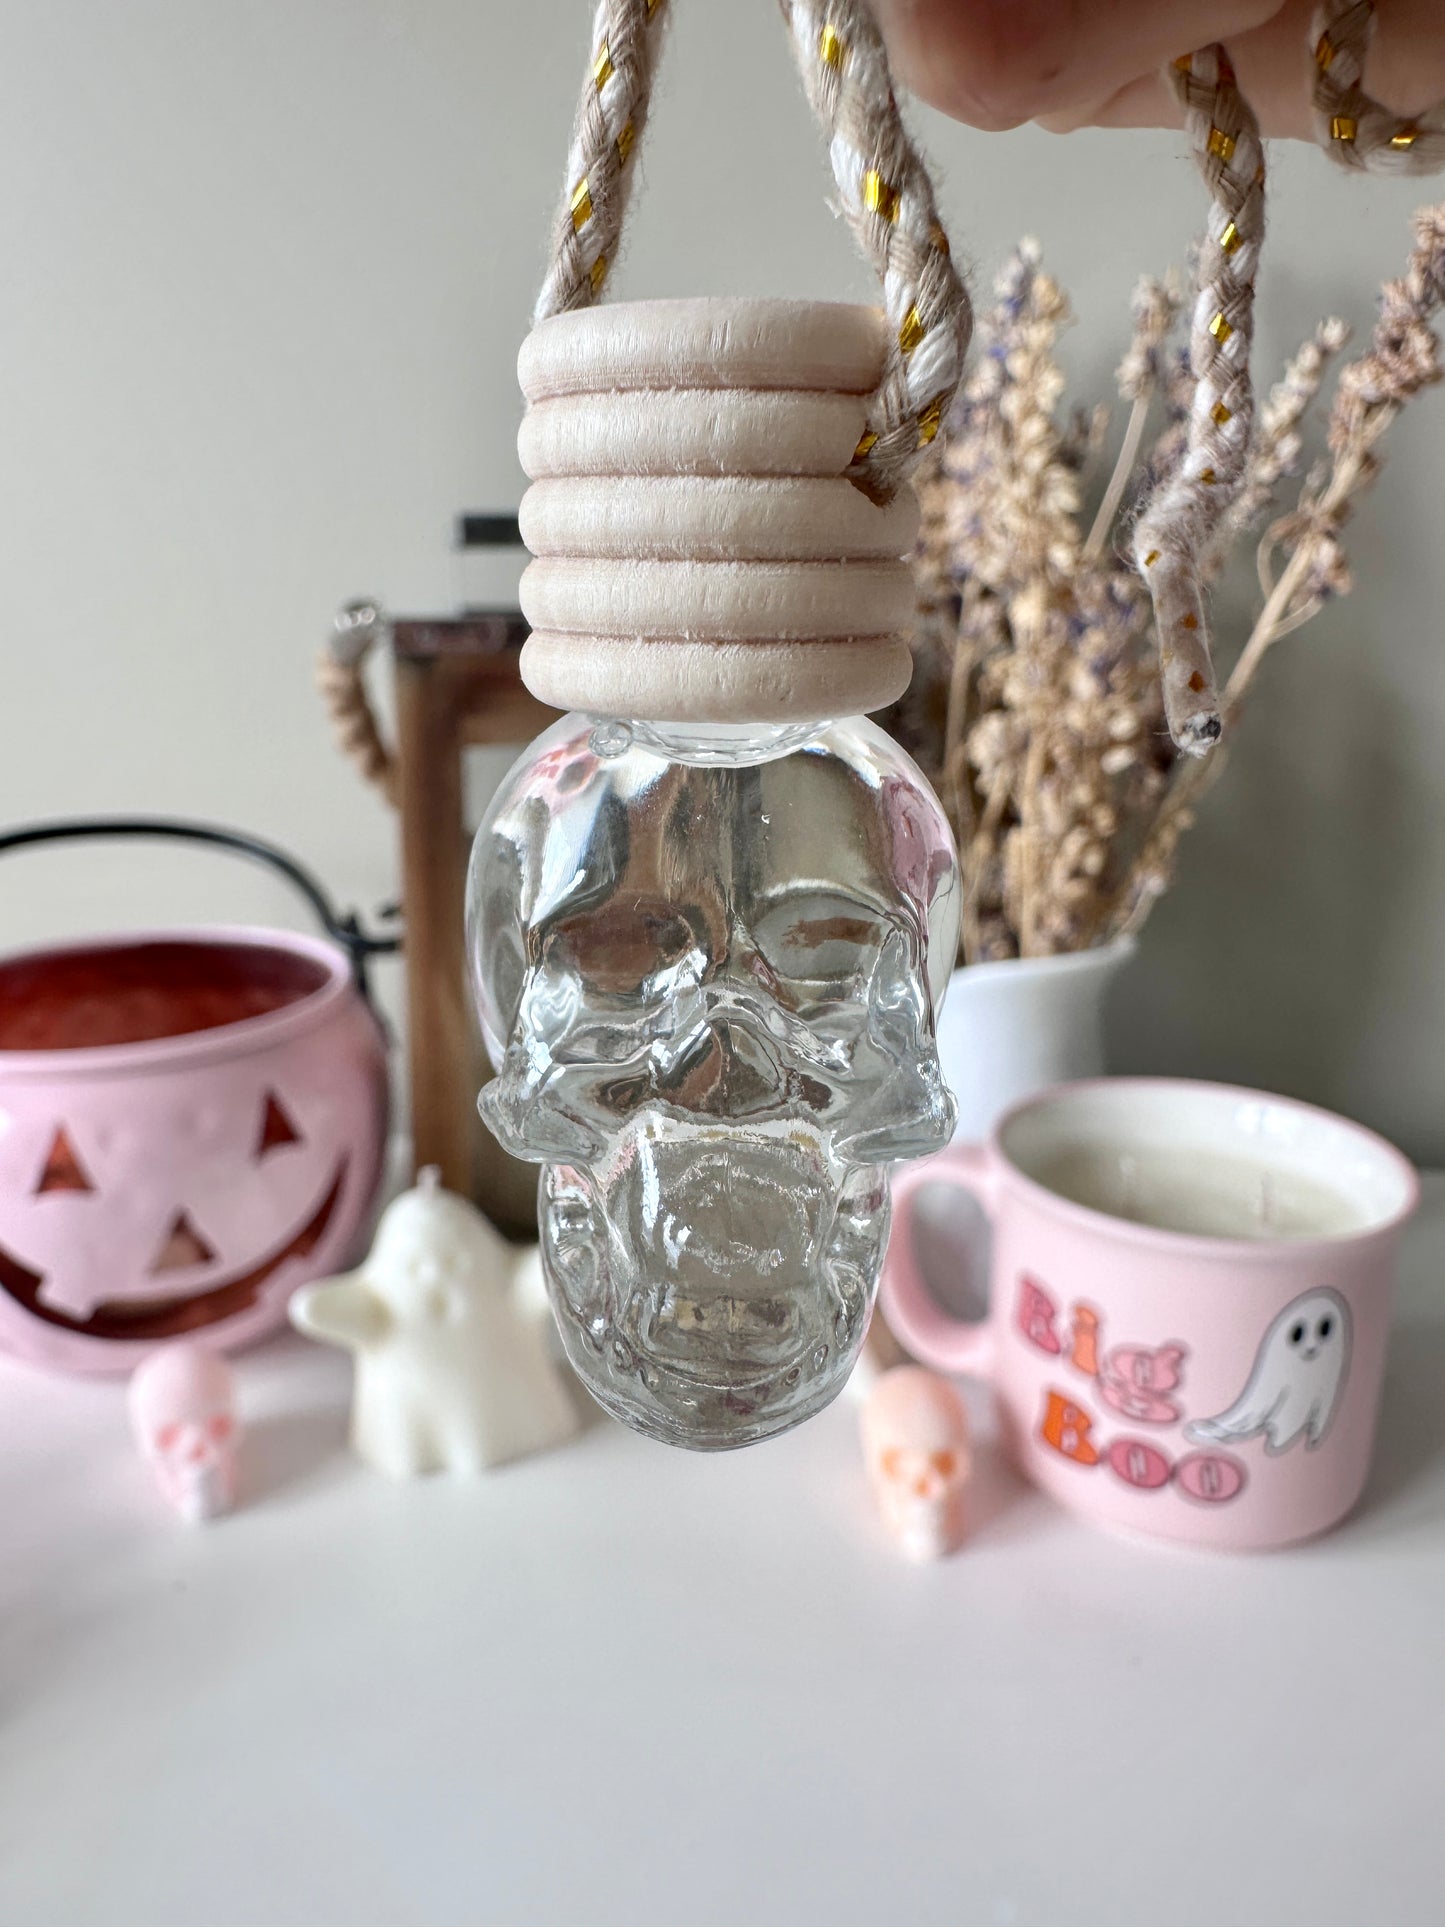 Skull Car Diffuser - 1 For $10.50 or 3 For $27